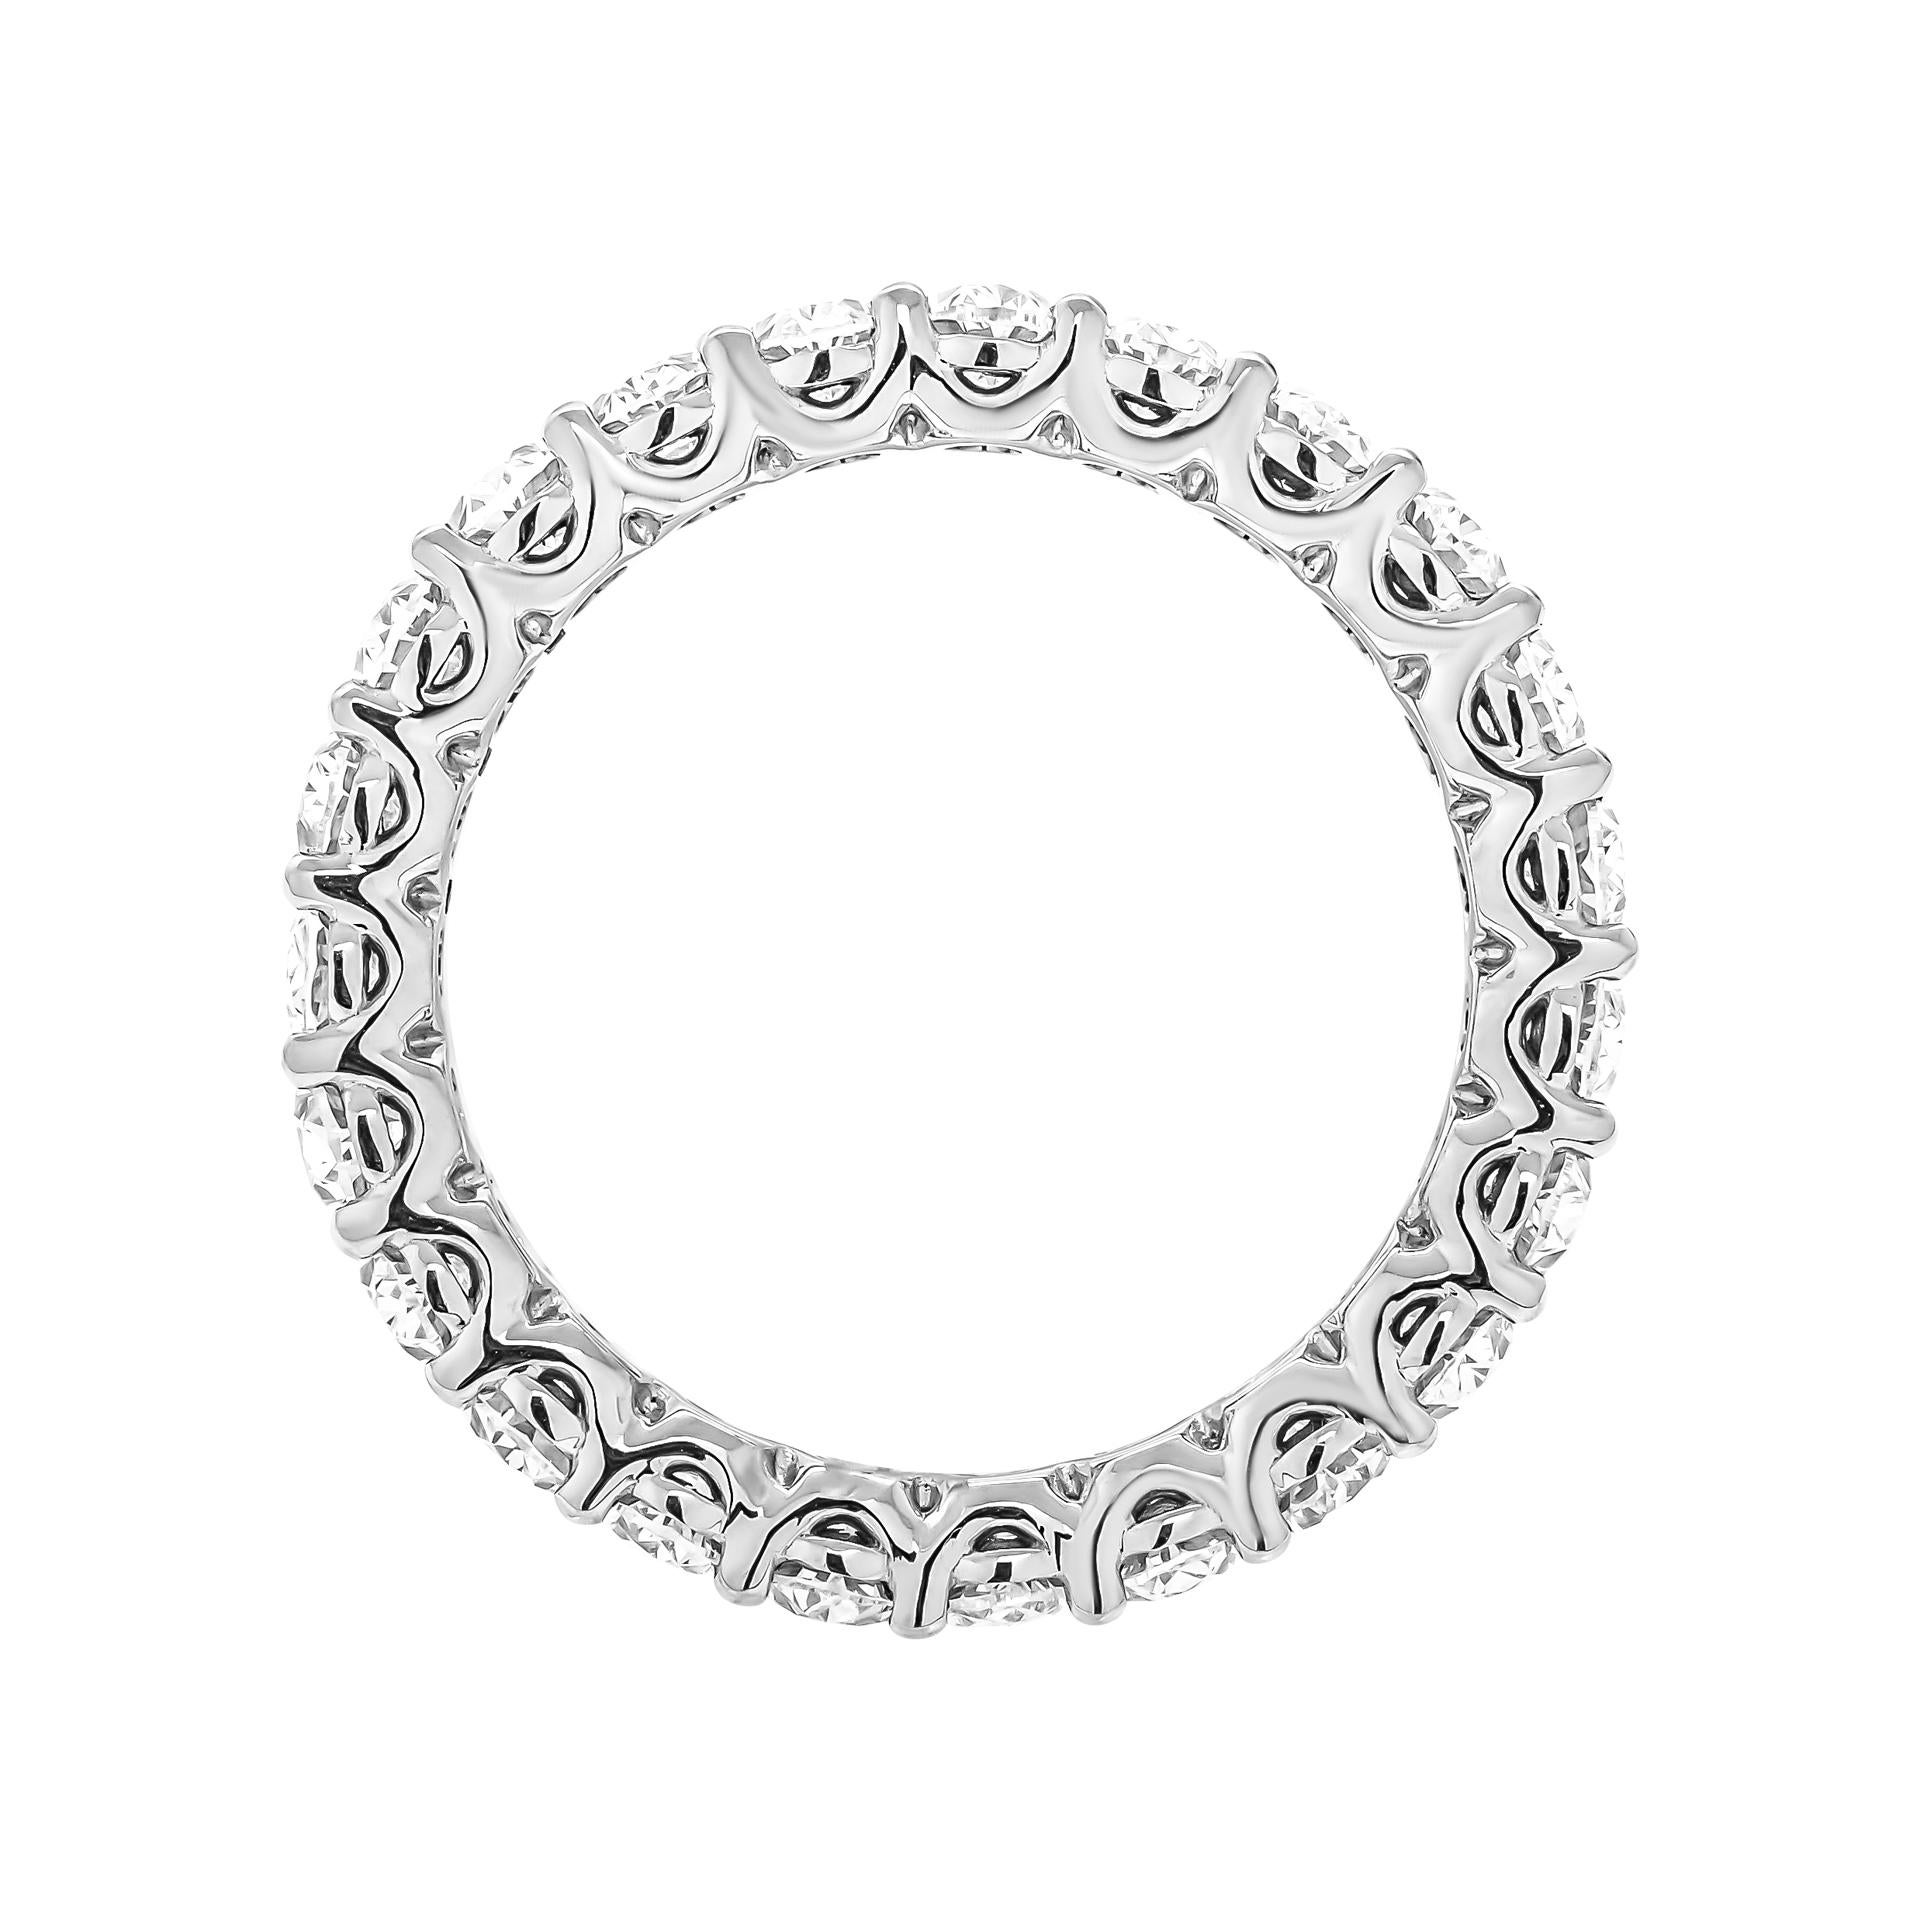 Eternity Wedding band in 14K White Gold with Oval Diamonds
23 stones totaling 3.10ct (0.13ct each) G/H color VS clarity 
Size: 6 ½ 
